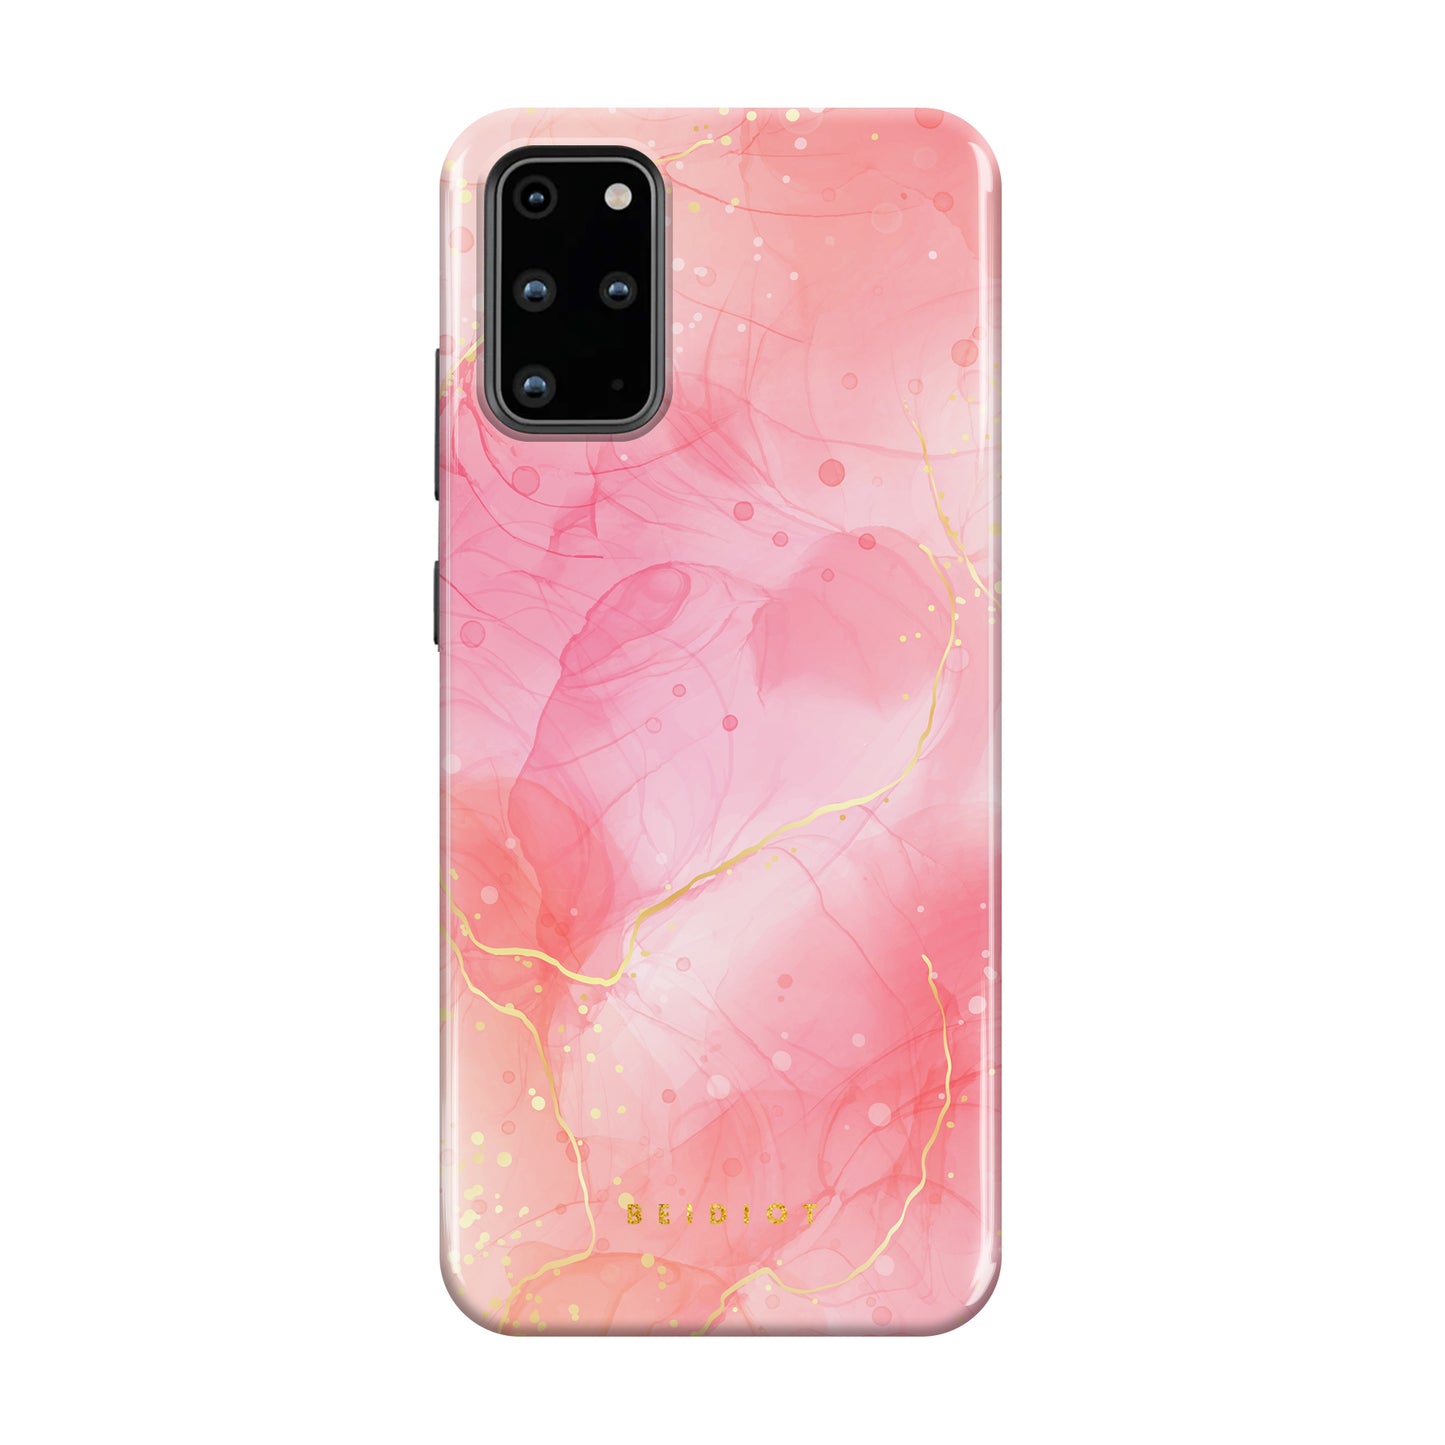 Pink Champagne Galaxy Case